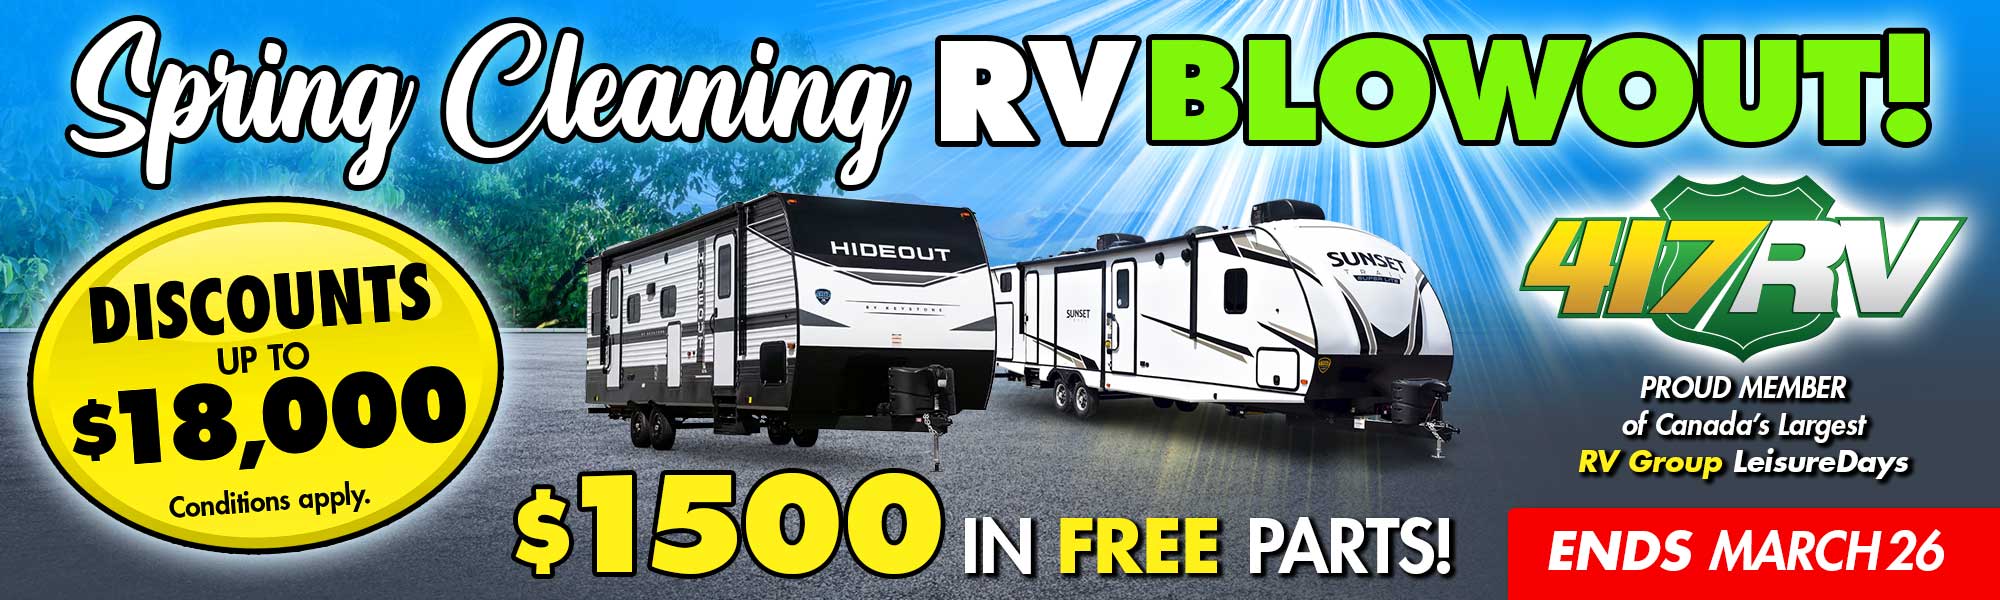 Spring Cleaning RV Blowout